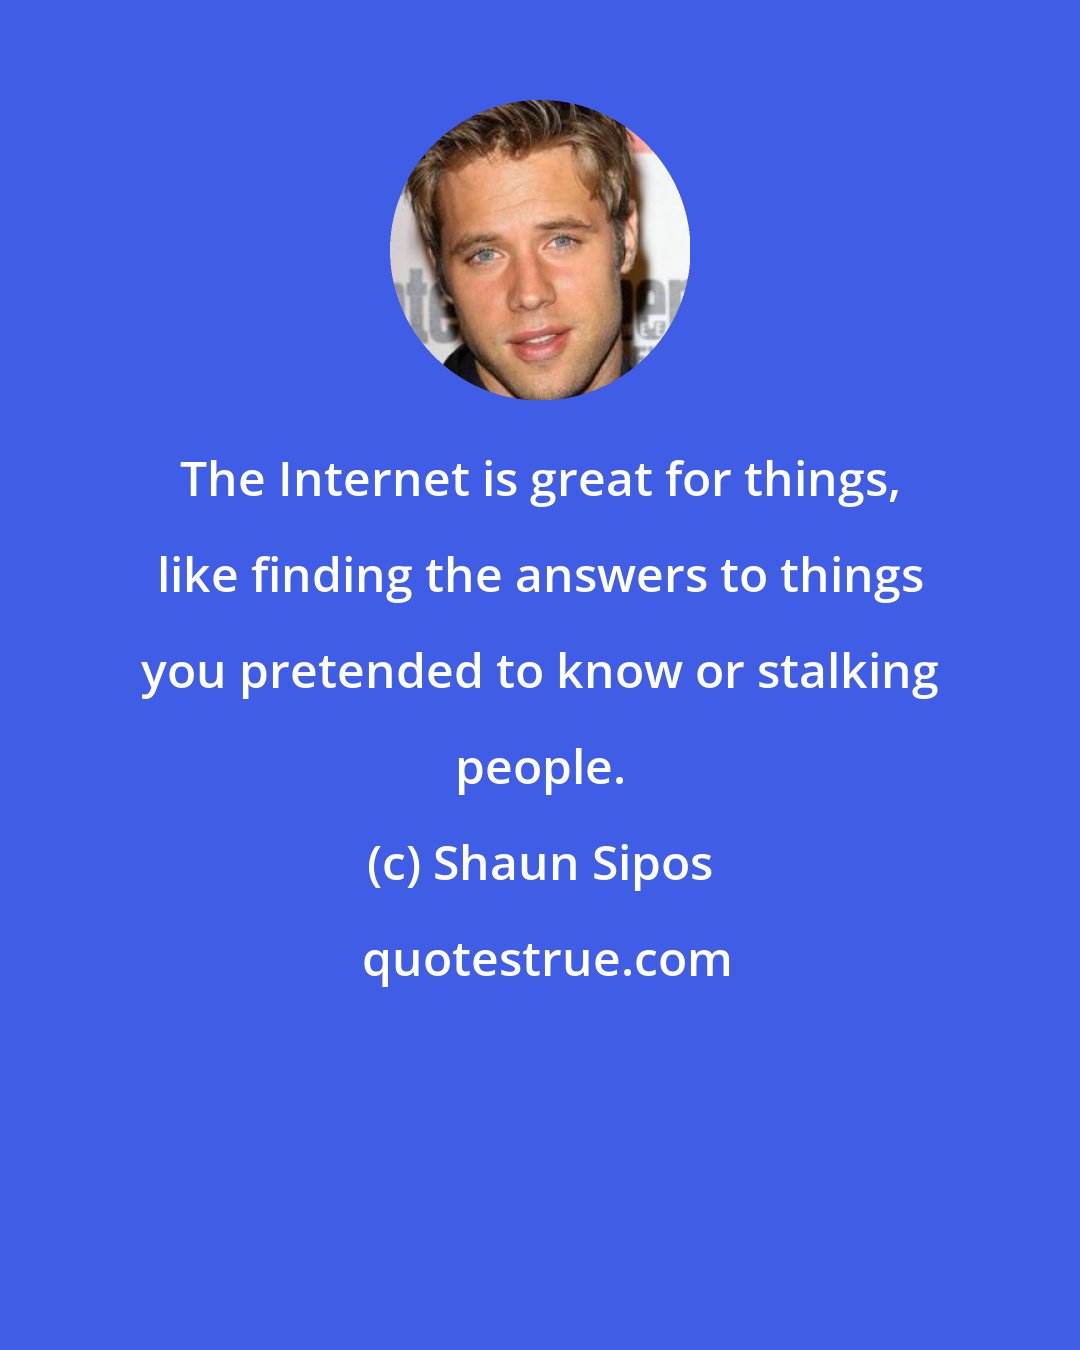 Shaun Sipos: The Internet is great for things, like finding the answers to things you pretended to know or stalking people.